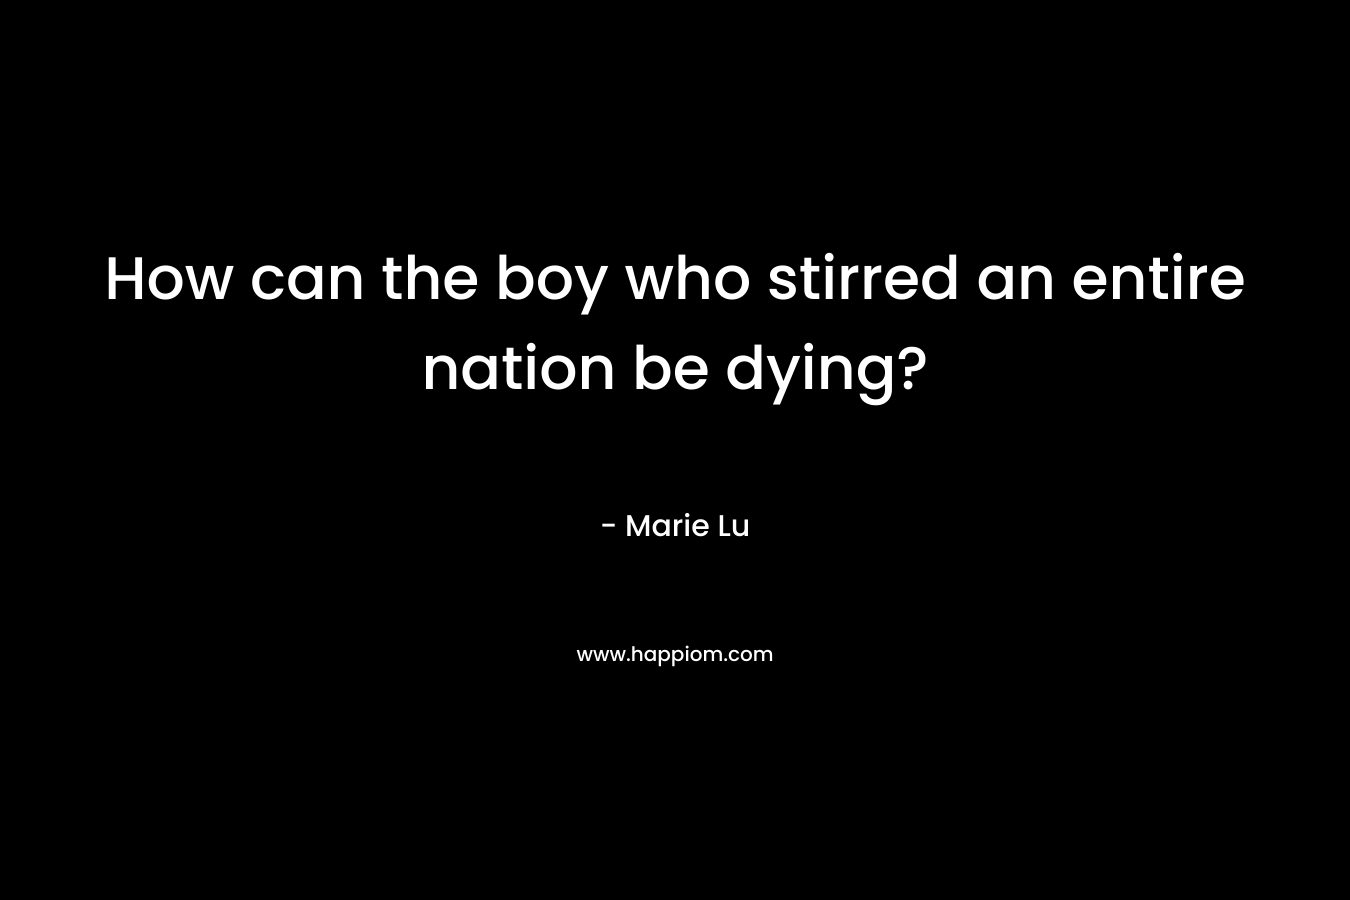 How can the boy who stirred an entire nation be dying?